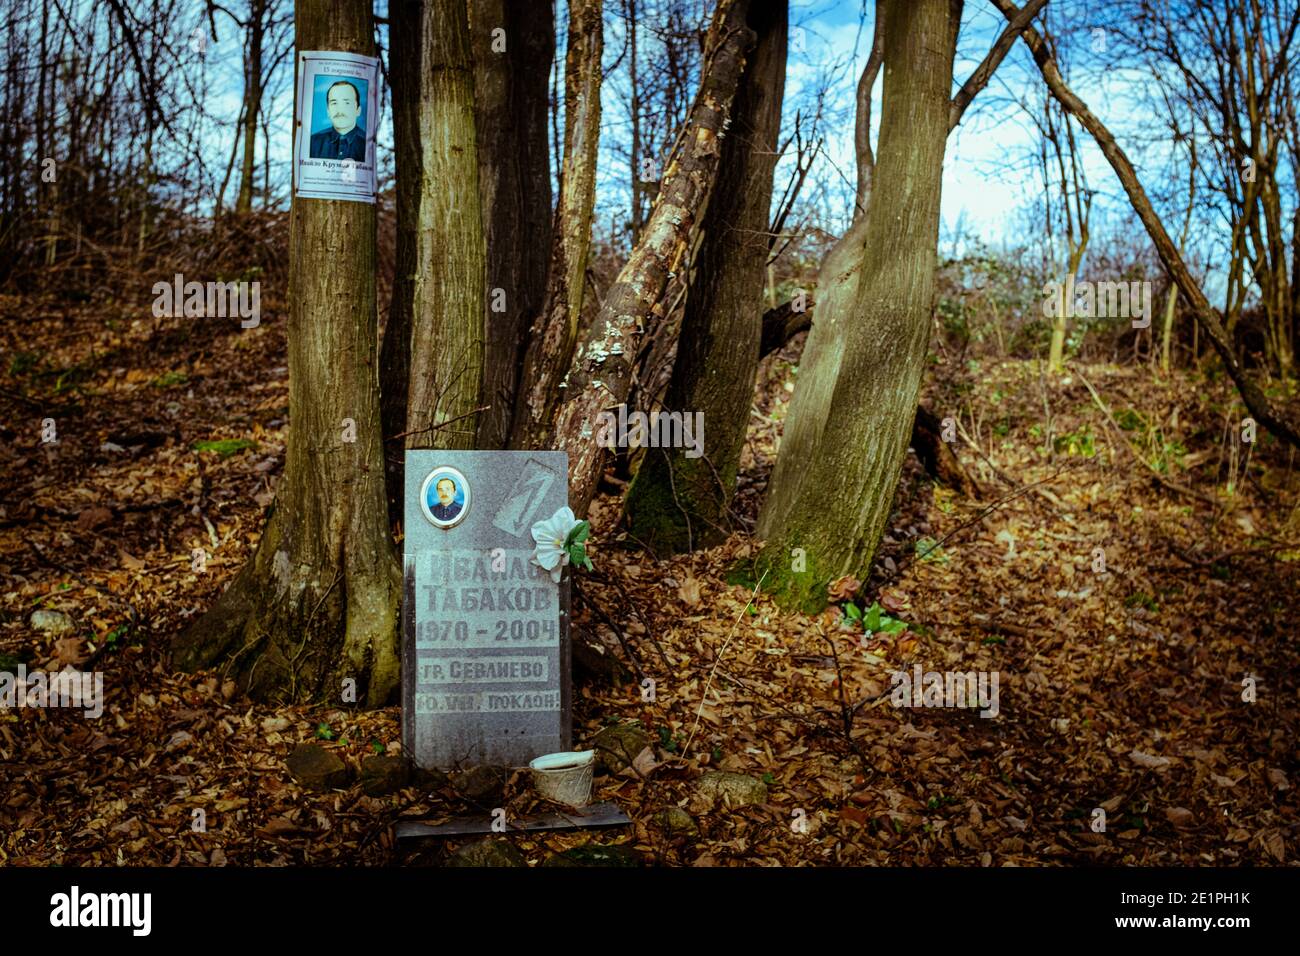 Gravestone marker shrine in a wooded forest in loving memory of death of young man. Stock Photo